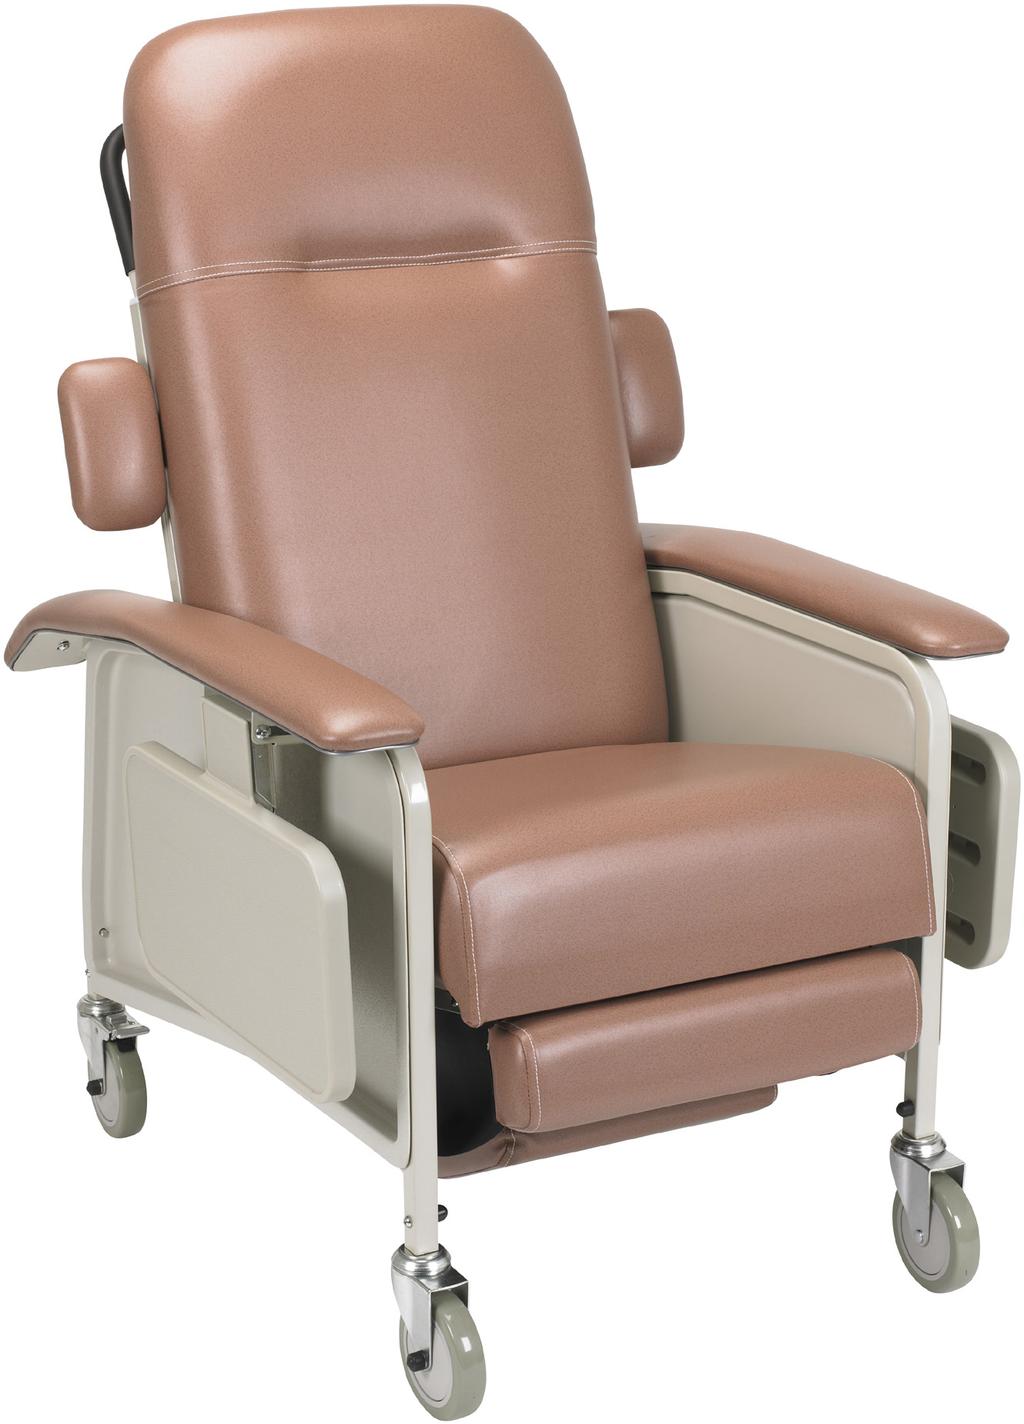 CLINICAL CARE RECLINER Item #s: D577-R, D577-J, D577-BR IMPORTANT SAFETY GUIDELINES PERIODICALLY INSPECT ALL PARTS